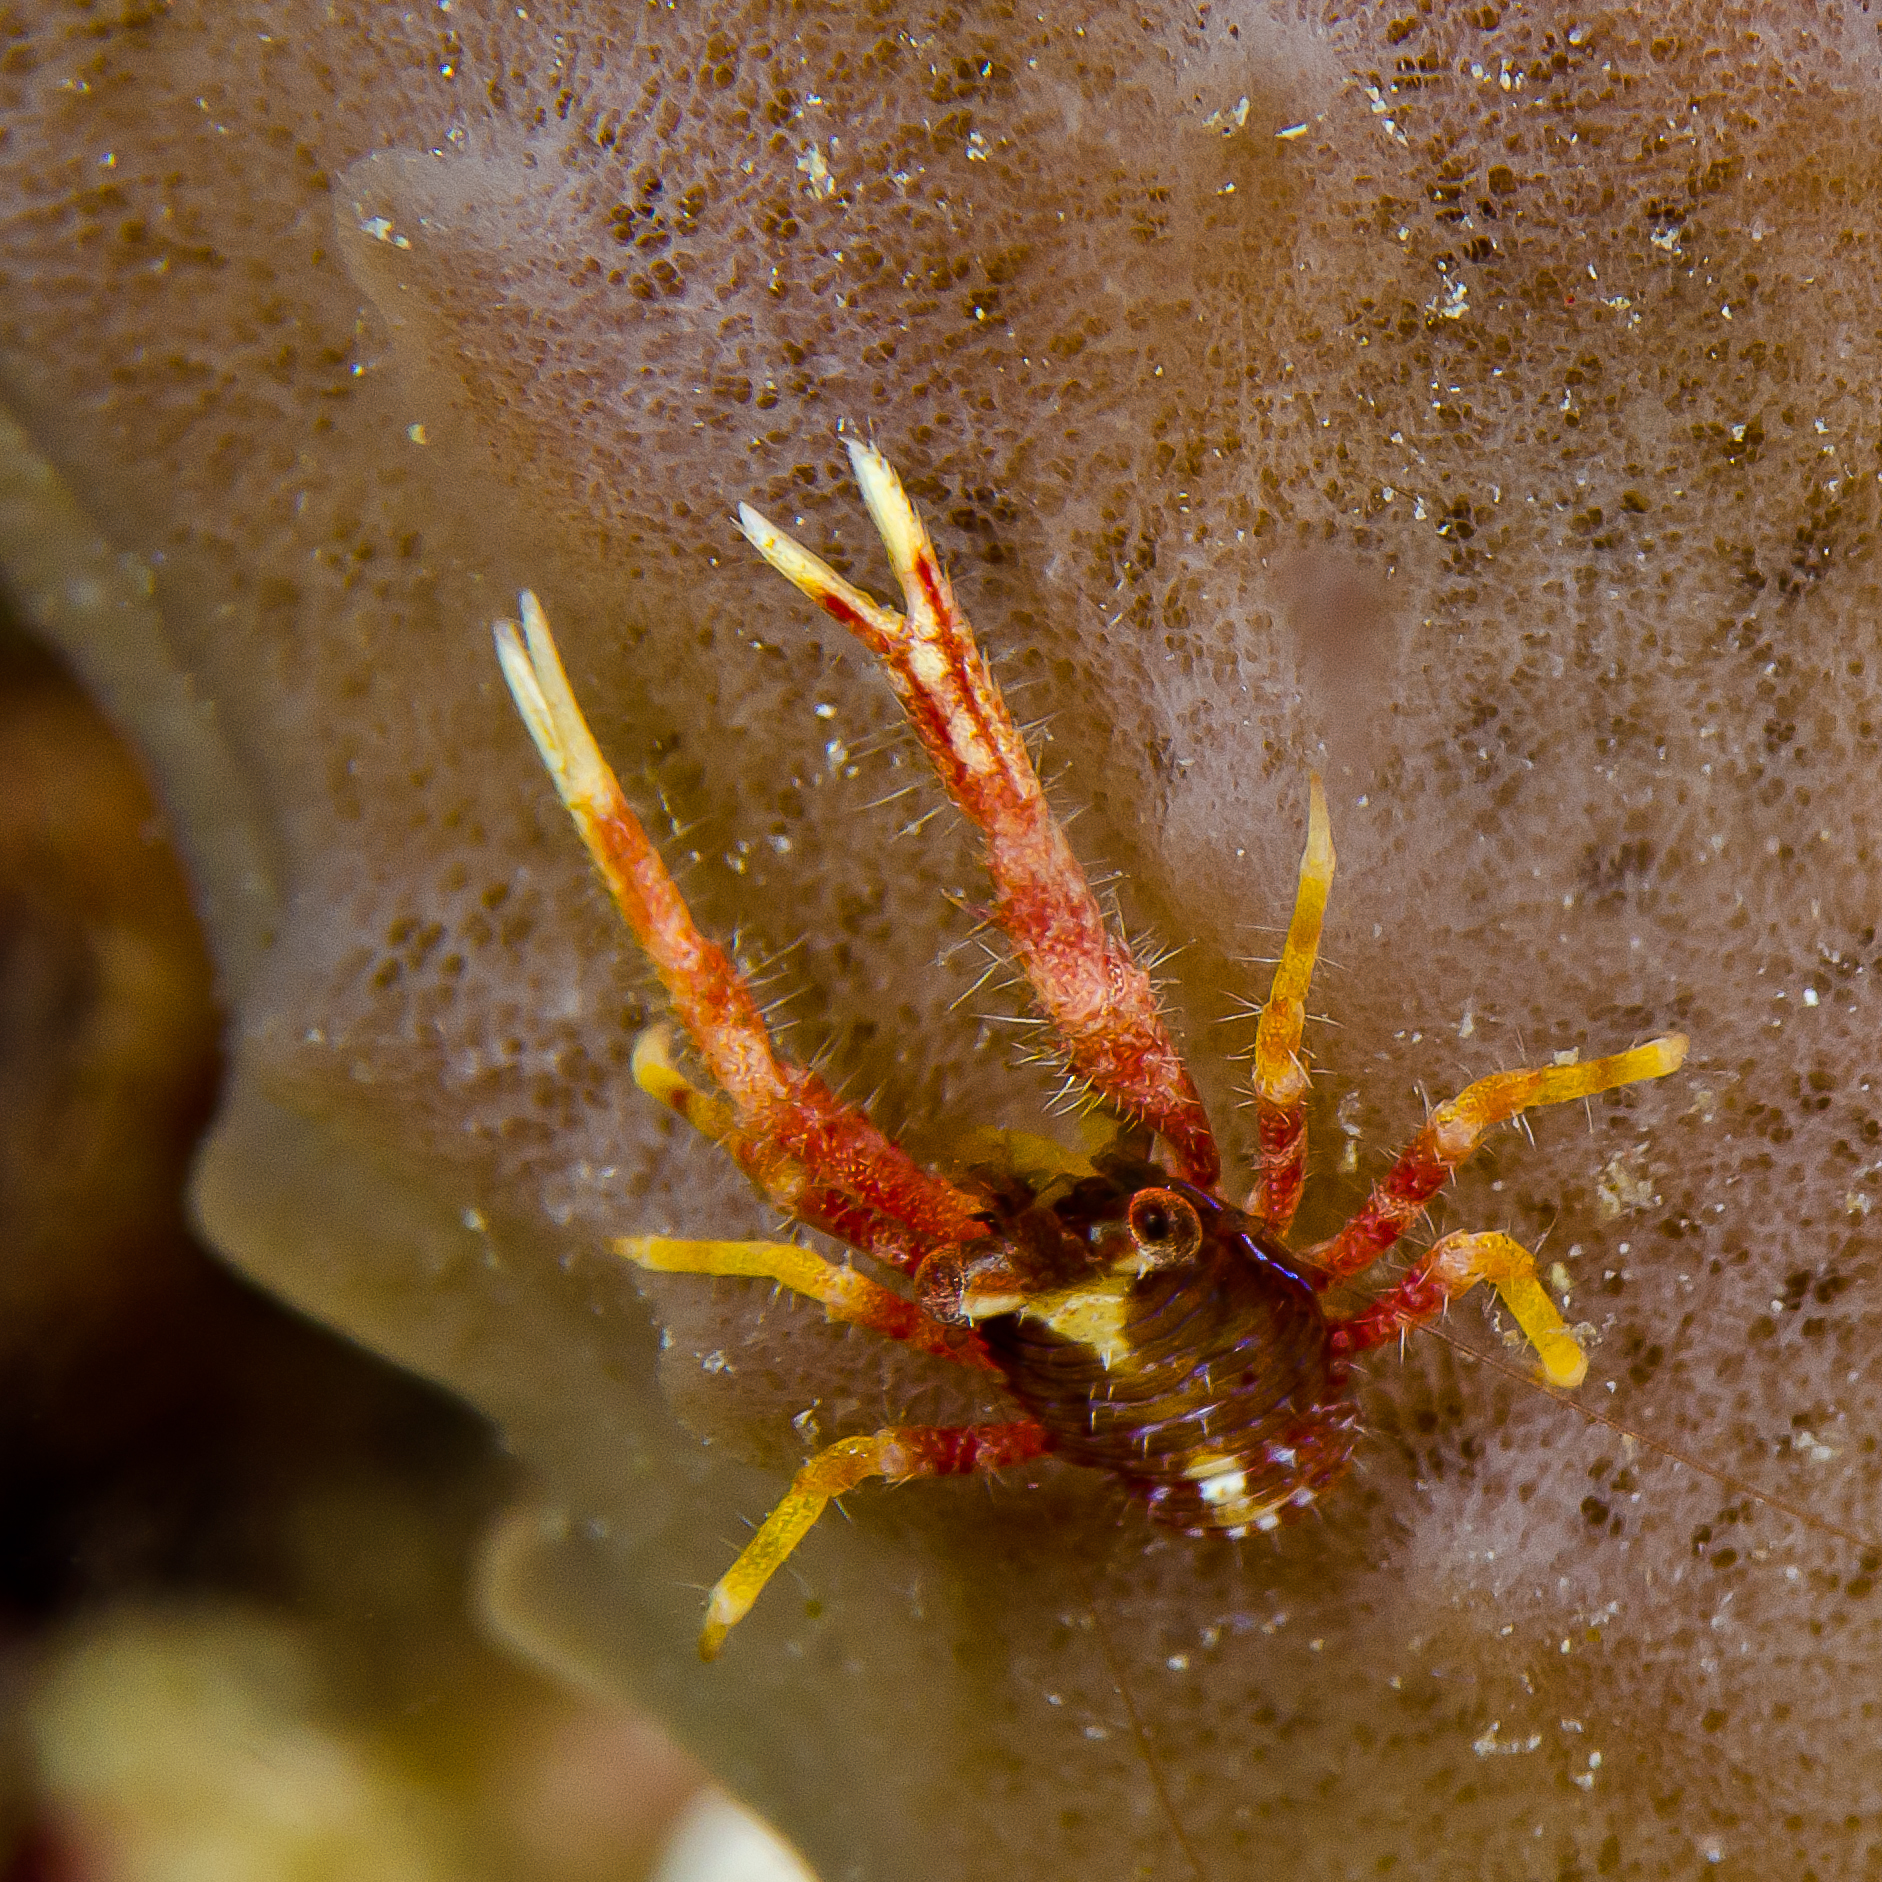 A small squat lobster hangs out on a vase sponge.